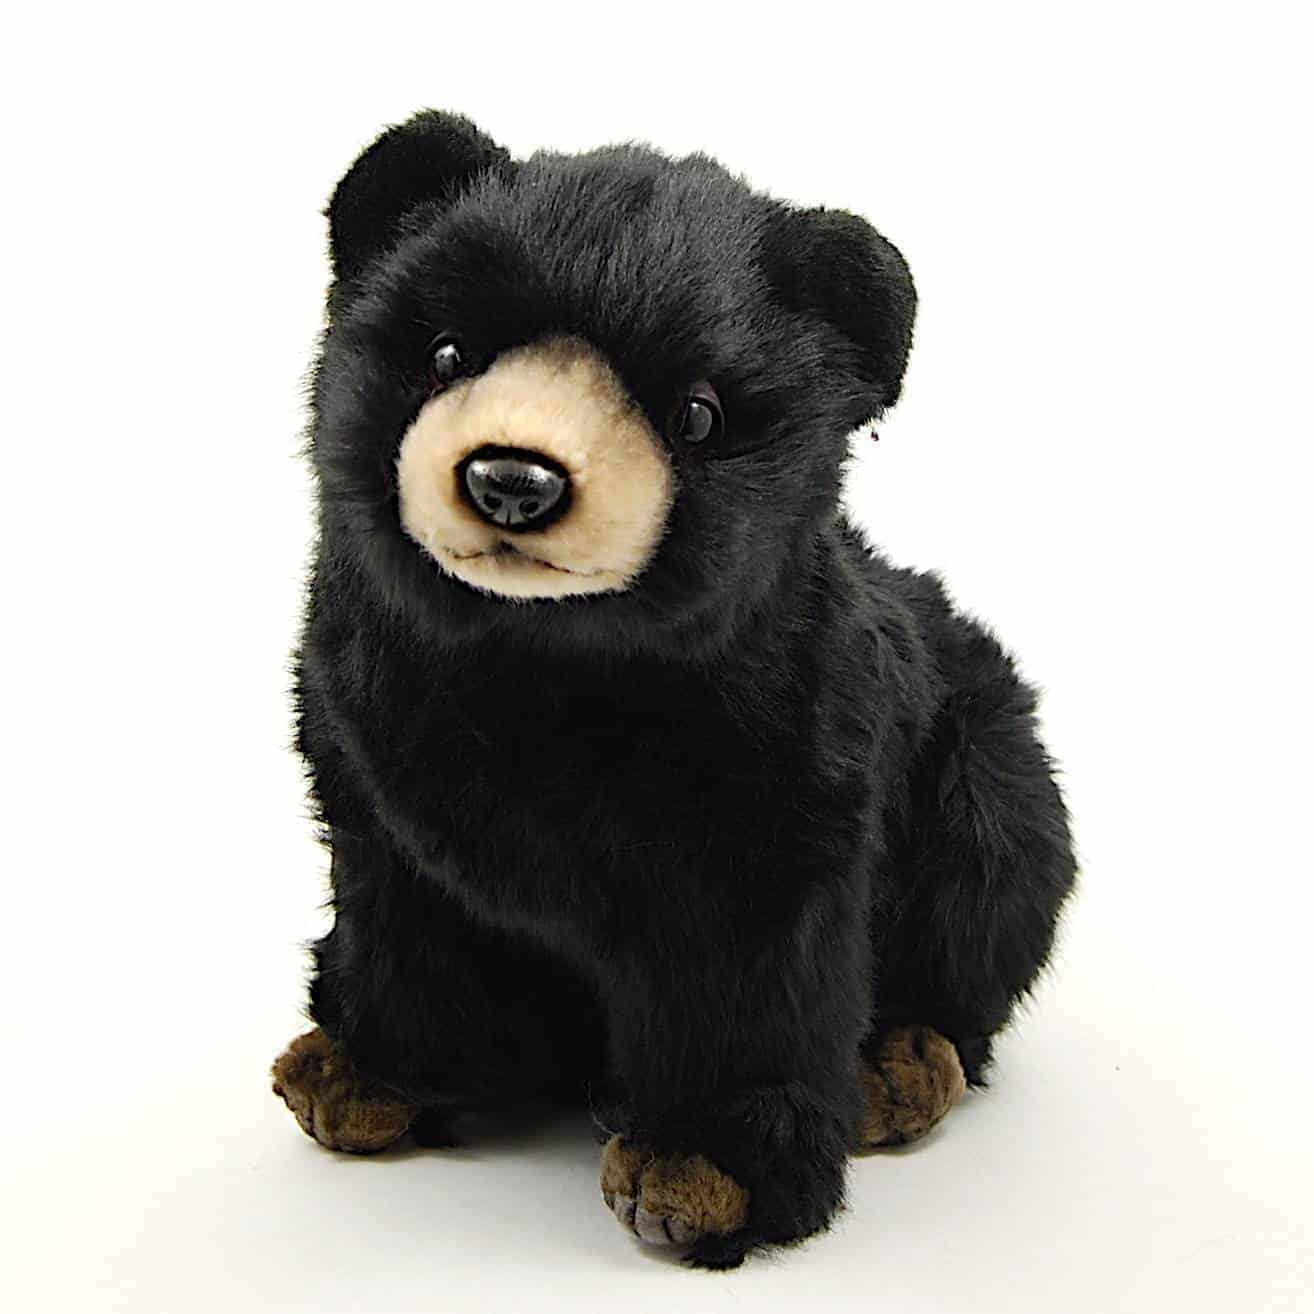 This Bear Cub Black 10'' by Hansa True to Life Look Soft Plush Animal Learning Toys is made with love by Premier Homegoods! Shop more unique gift ideas today with Spots Initiatives, the best way to support creators.